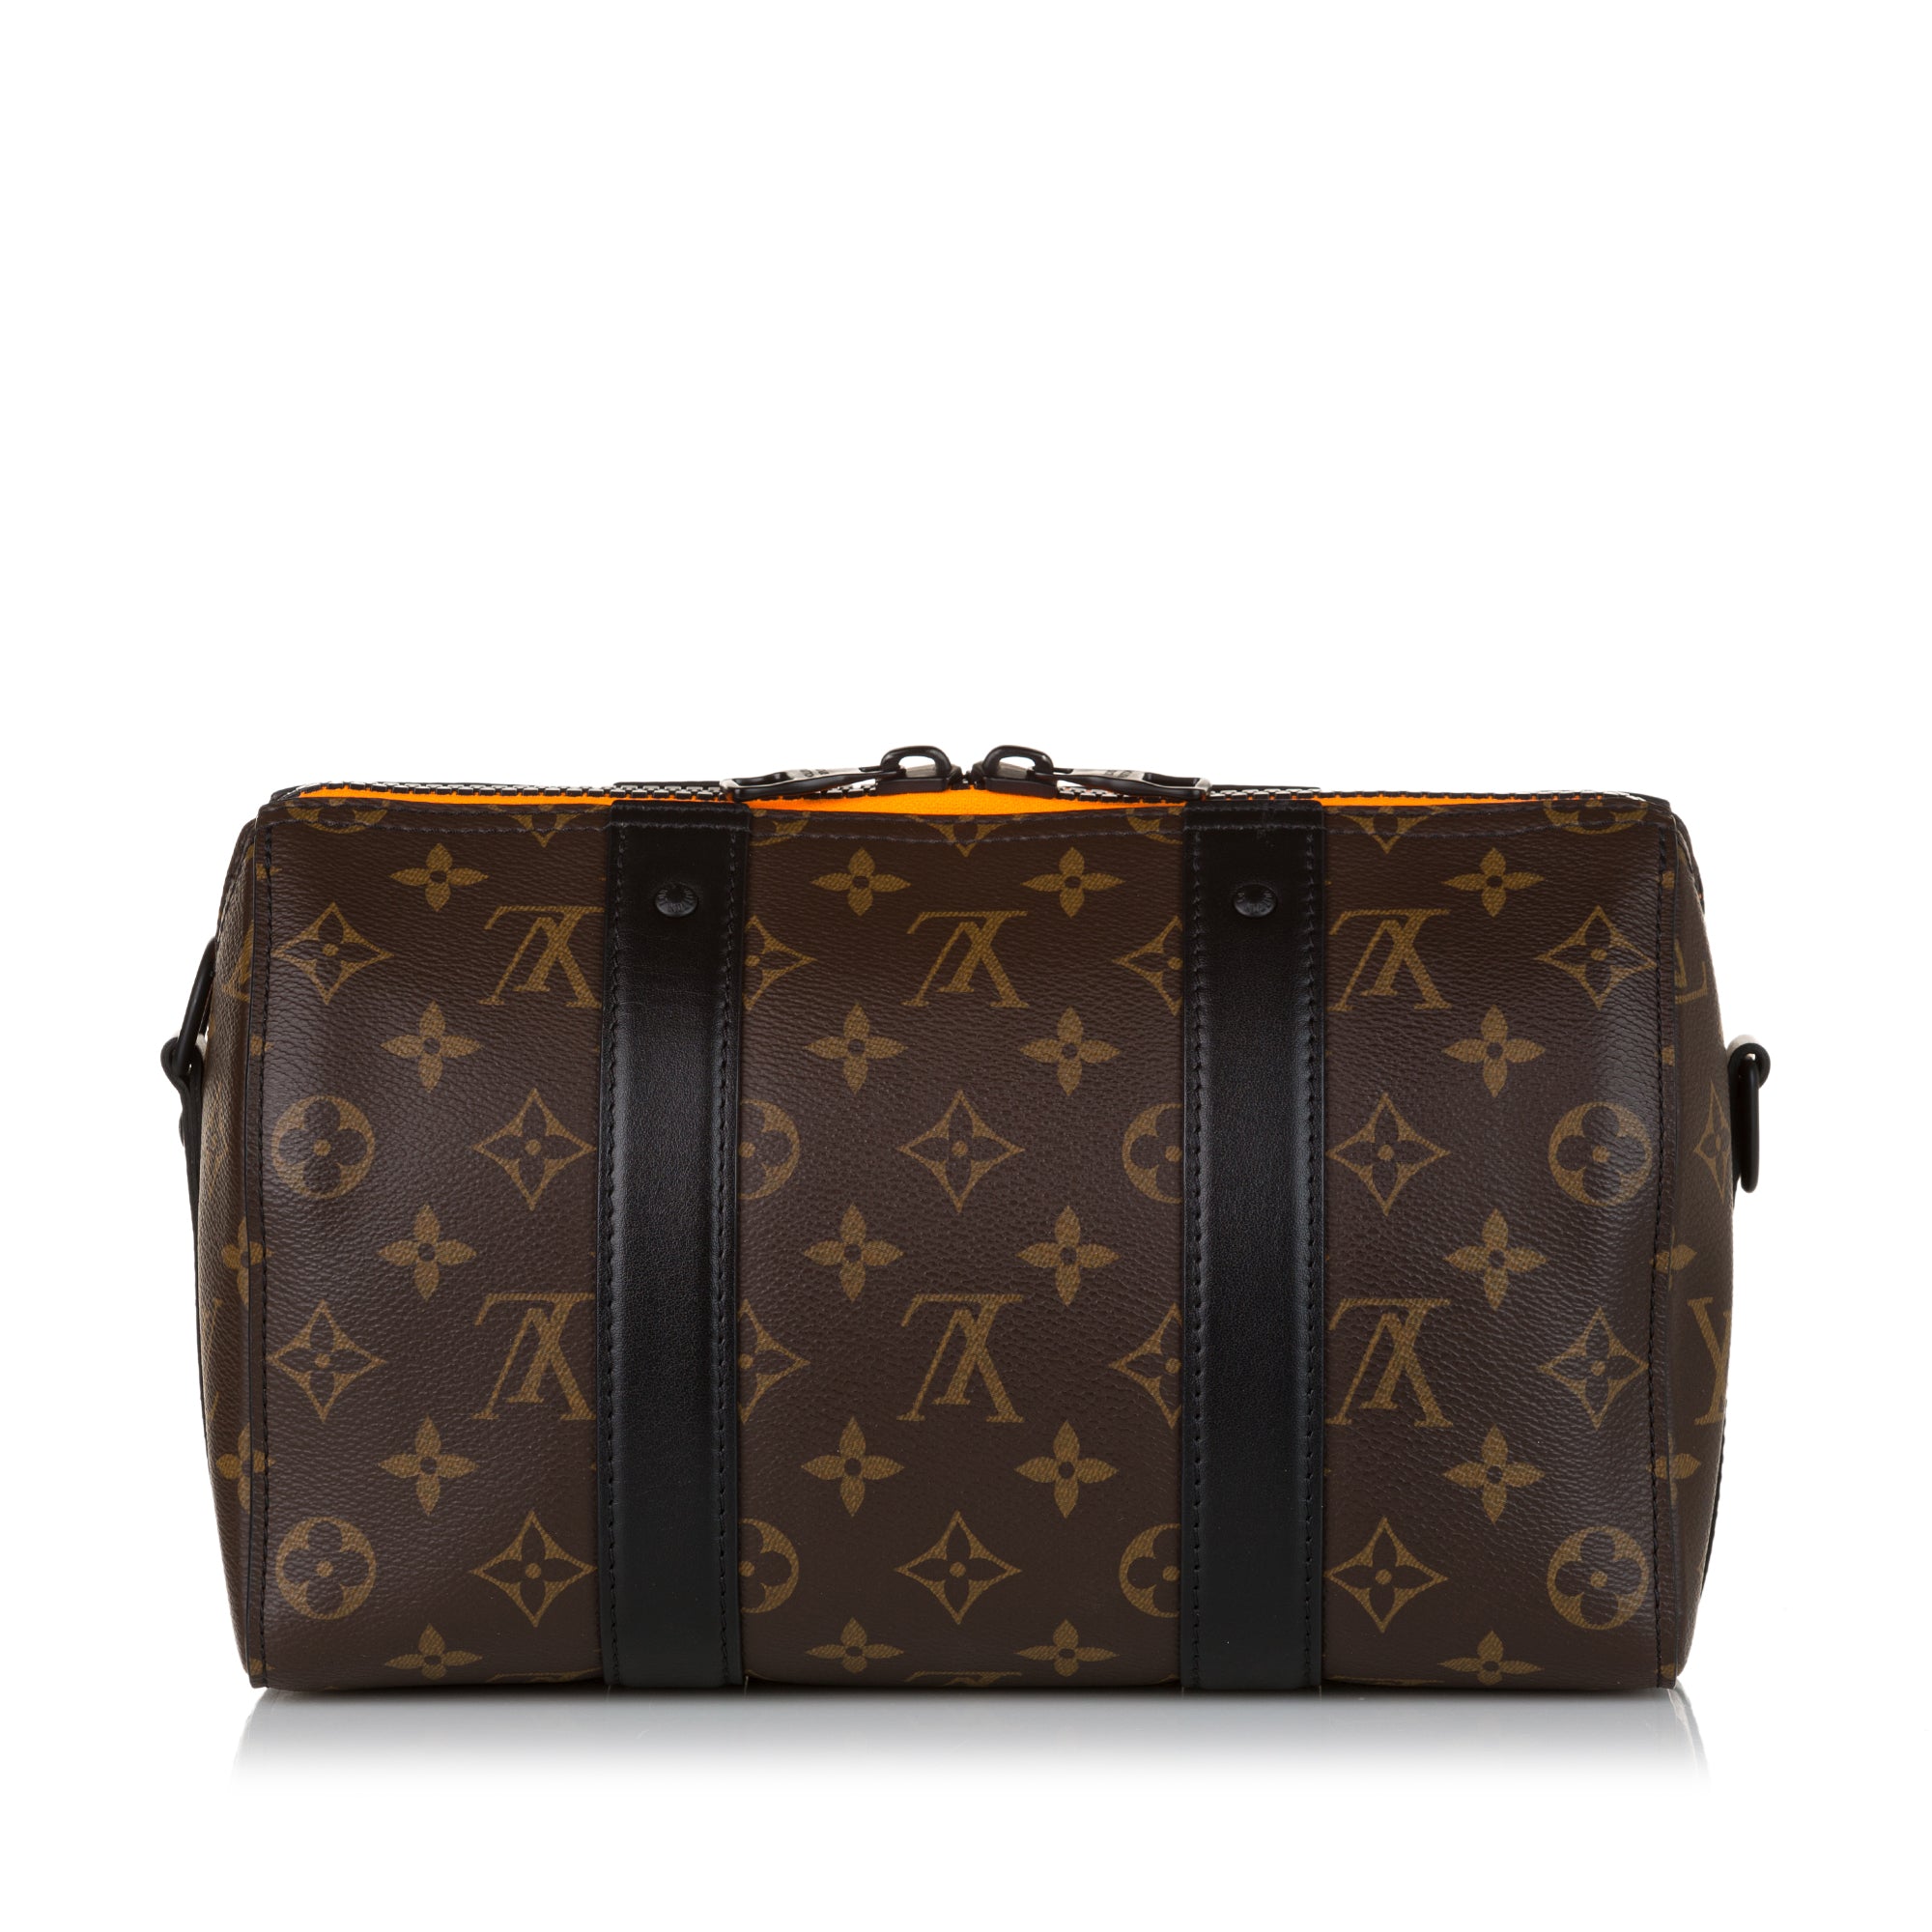 Limited Edition Louis Vuitton City Keepall XS Bandolier Bag